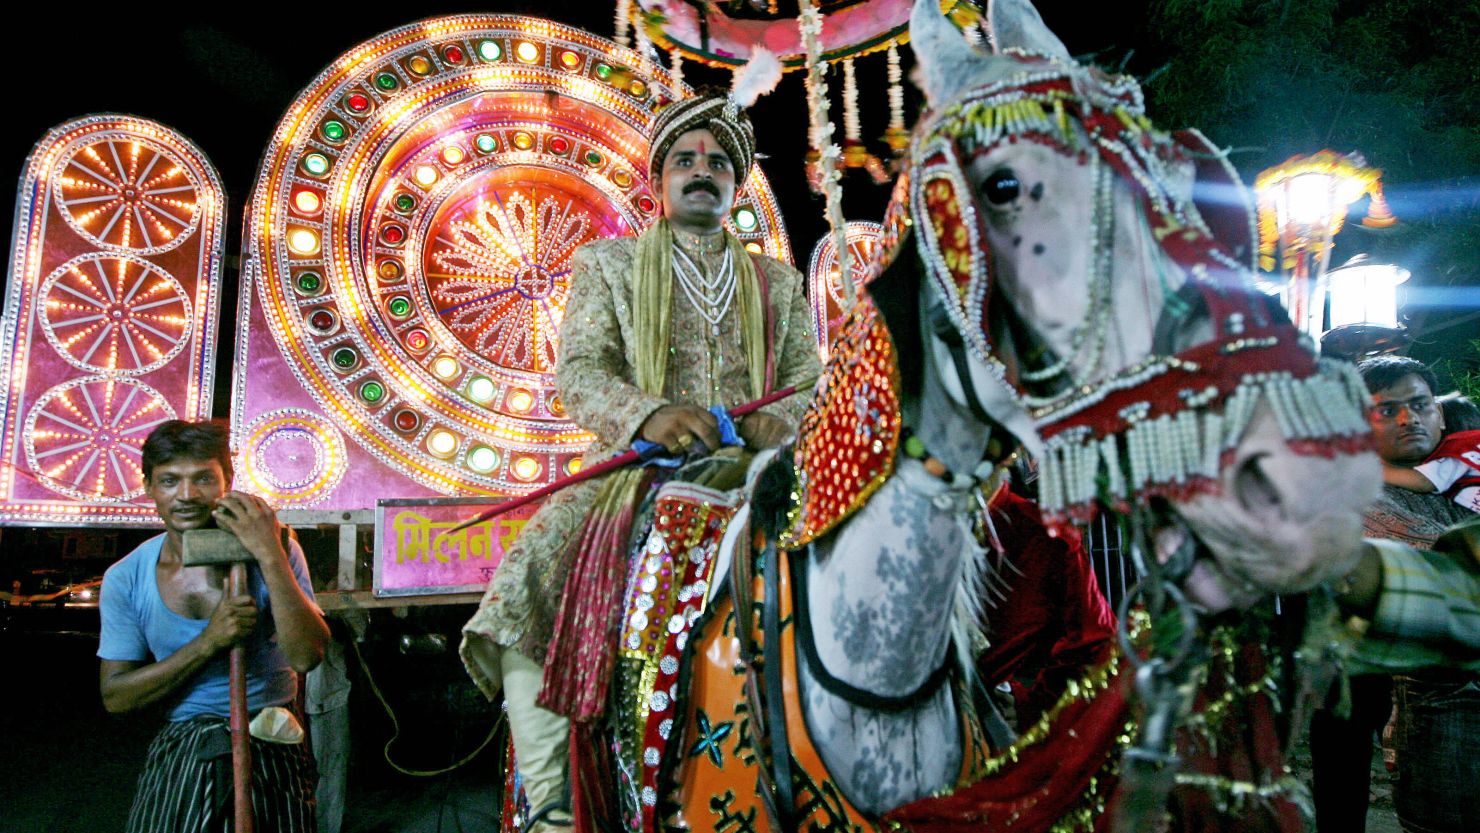 An Indian groom rides a horse on his way to his bride's house for their wedding ceremony.